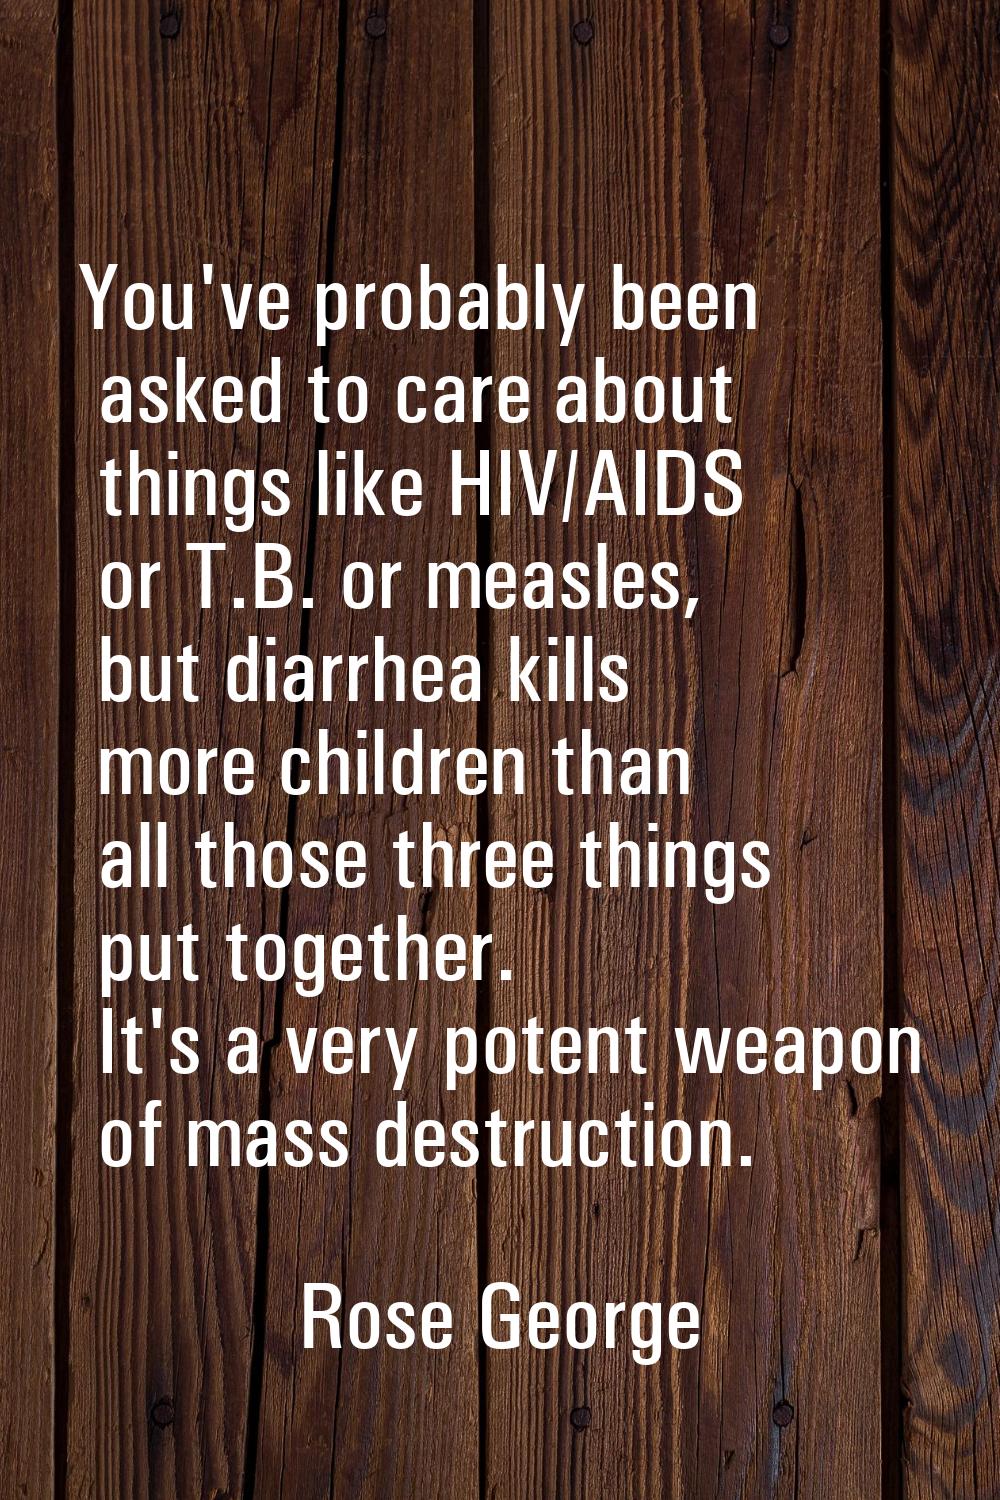 You've probably been asked to care about things like HIV/AIDS or T.B. or measles, but diarrhea kill